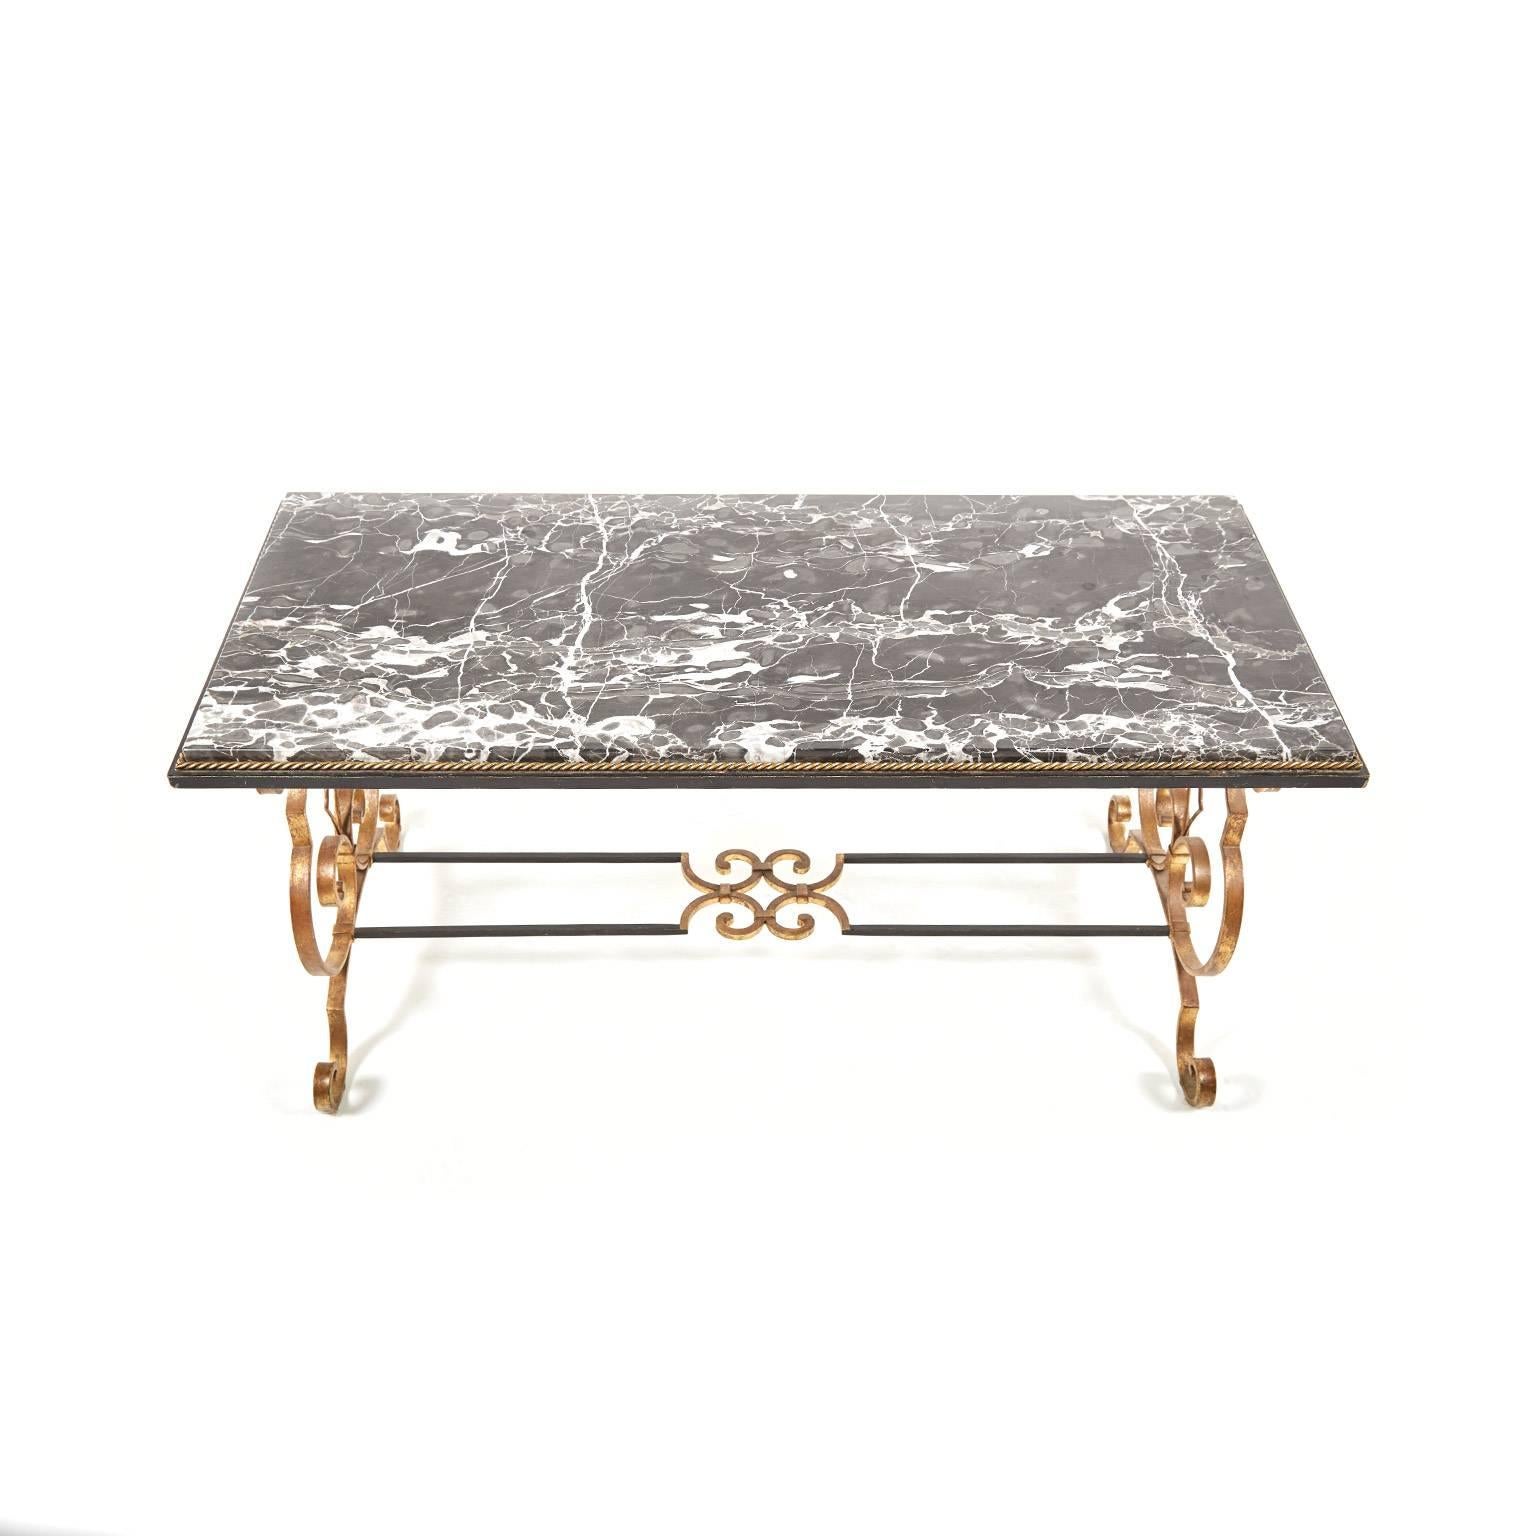 French Raymond Subes Coffee Table from Paris circa 1940